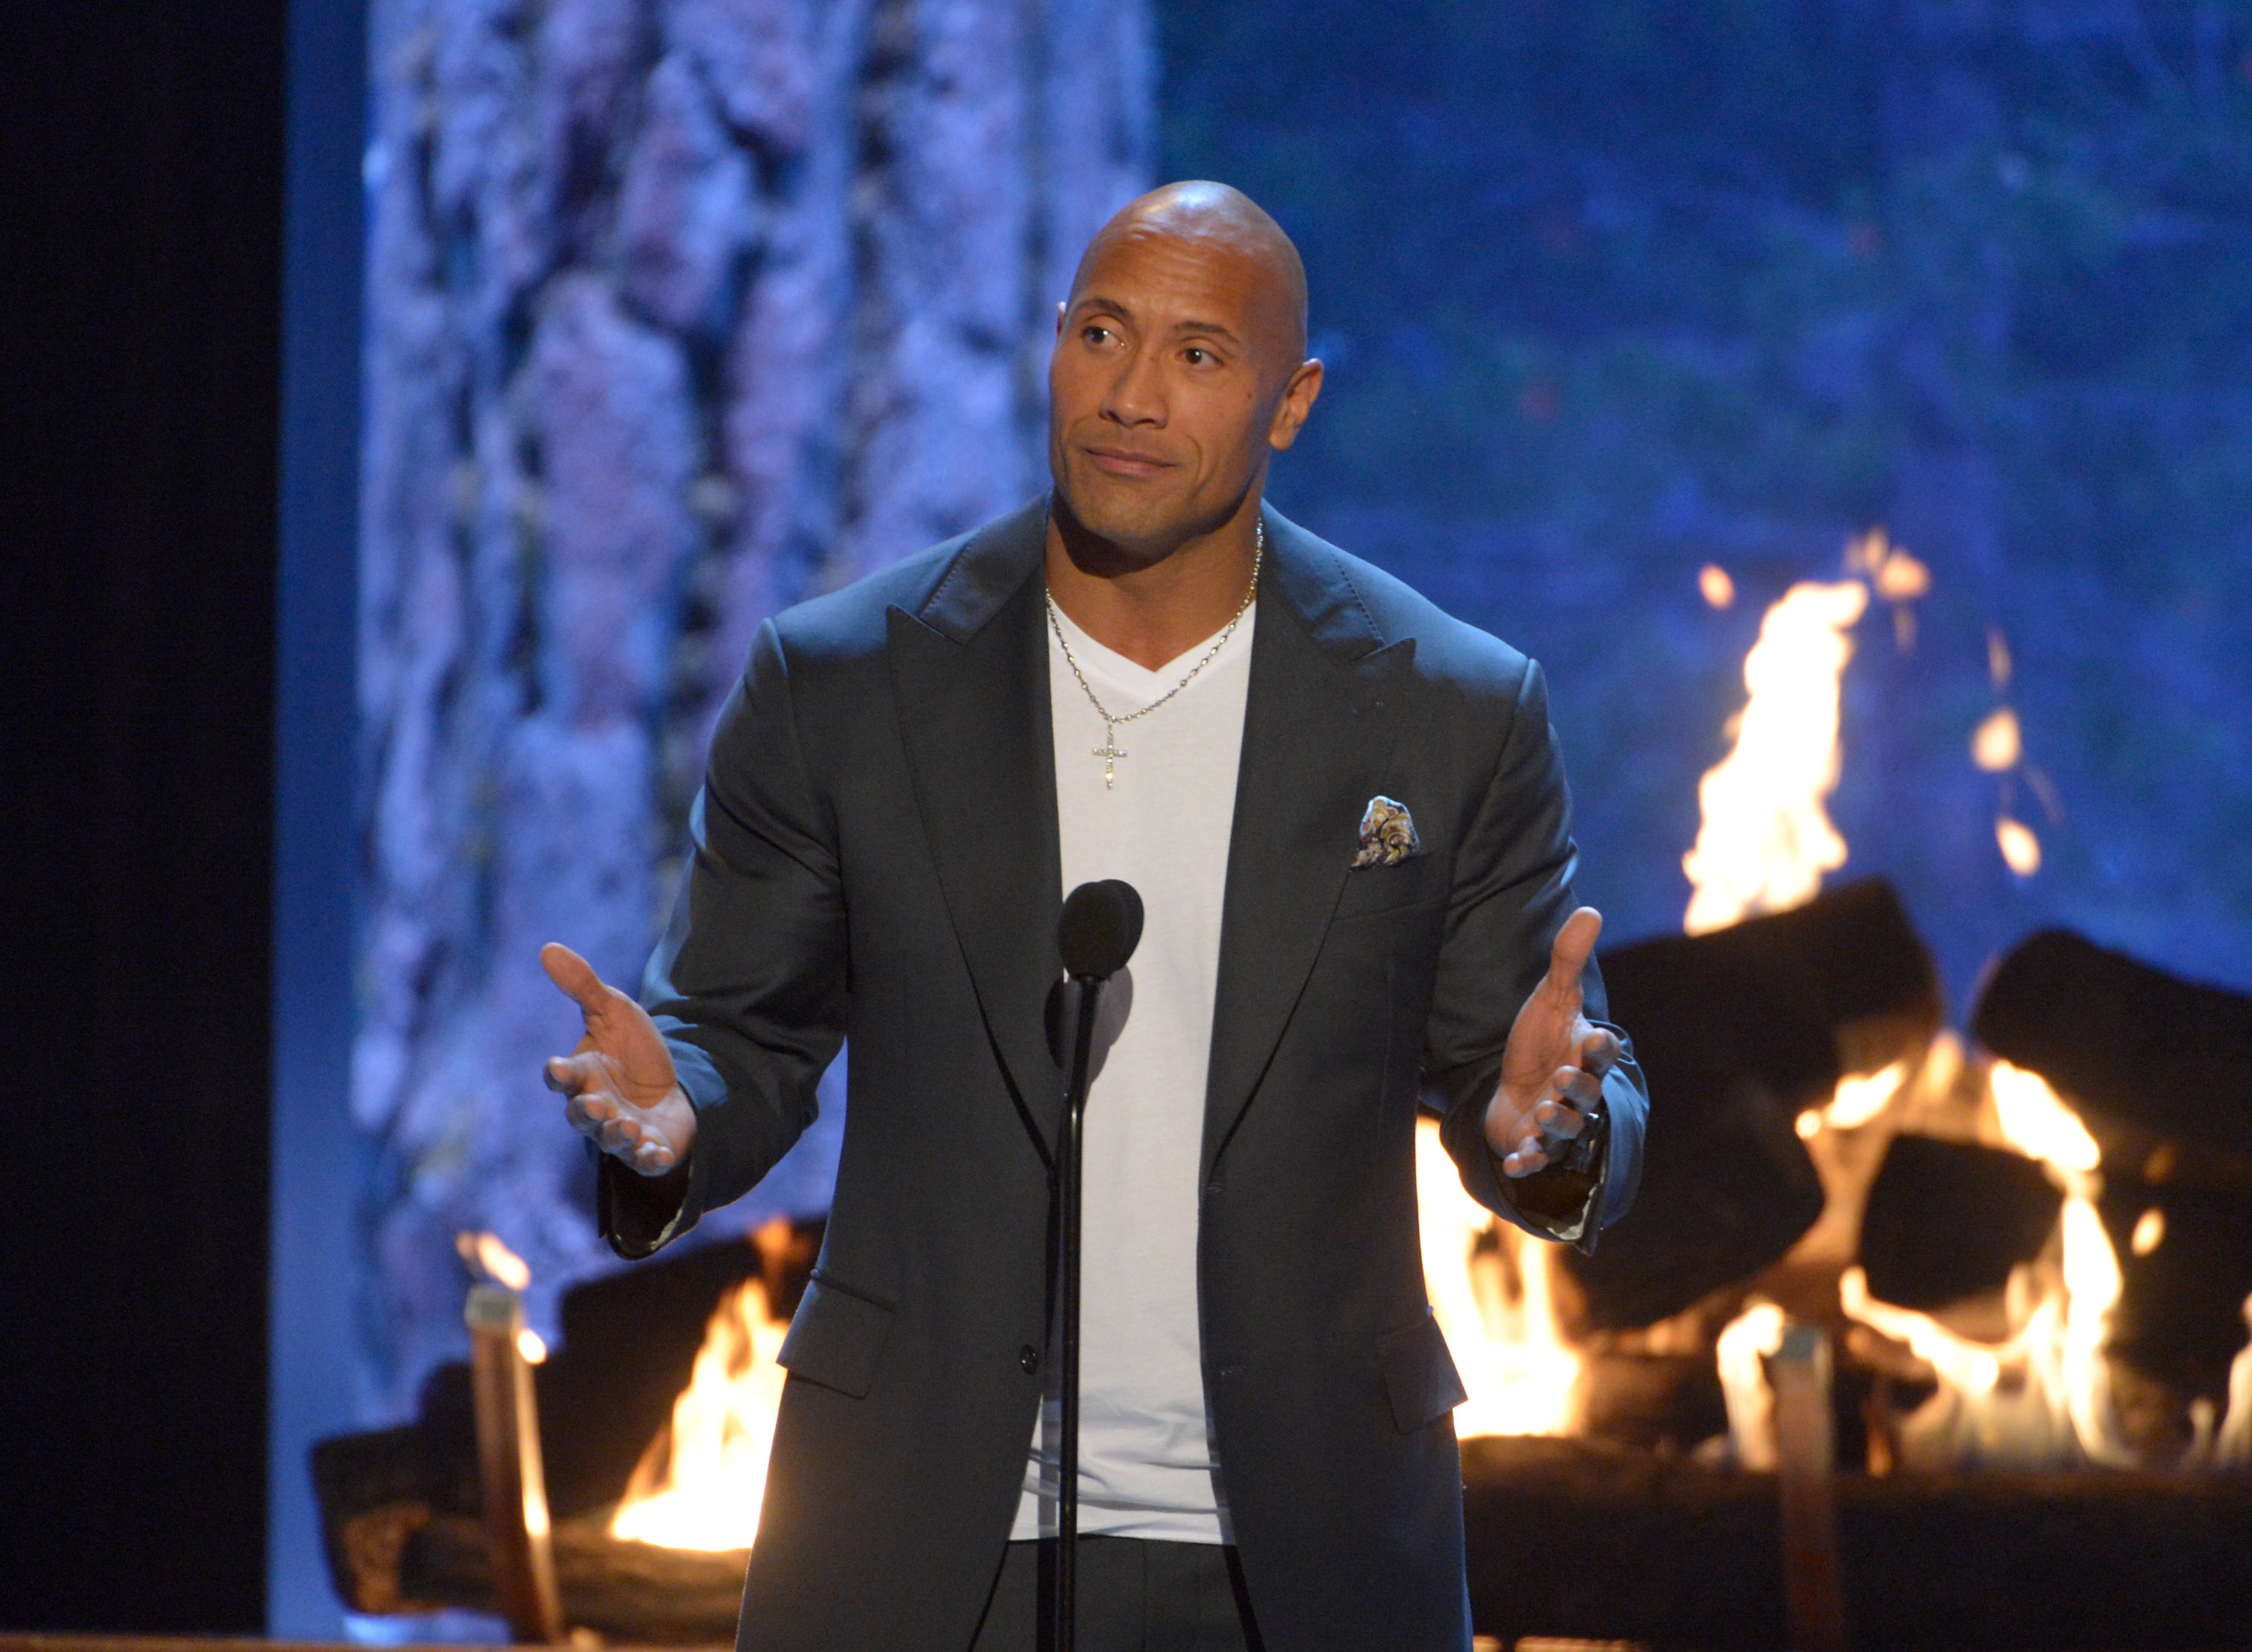 Dwayne Johnson accepts the “Hero” award at the 2015 Spike TV Guy's Choice Awards at Sony Studios on June 6, 2015, at Sony Studios in Culver City, Calif. (Phil McCarten—Invision/AP)